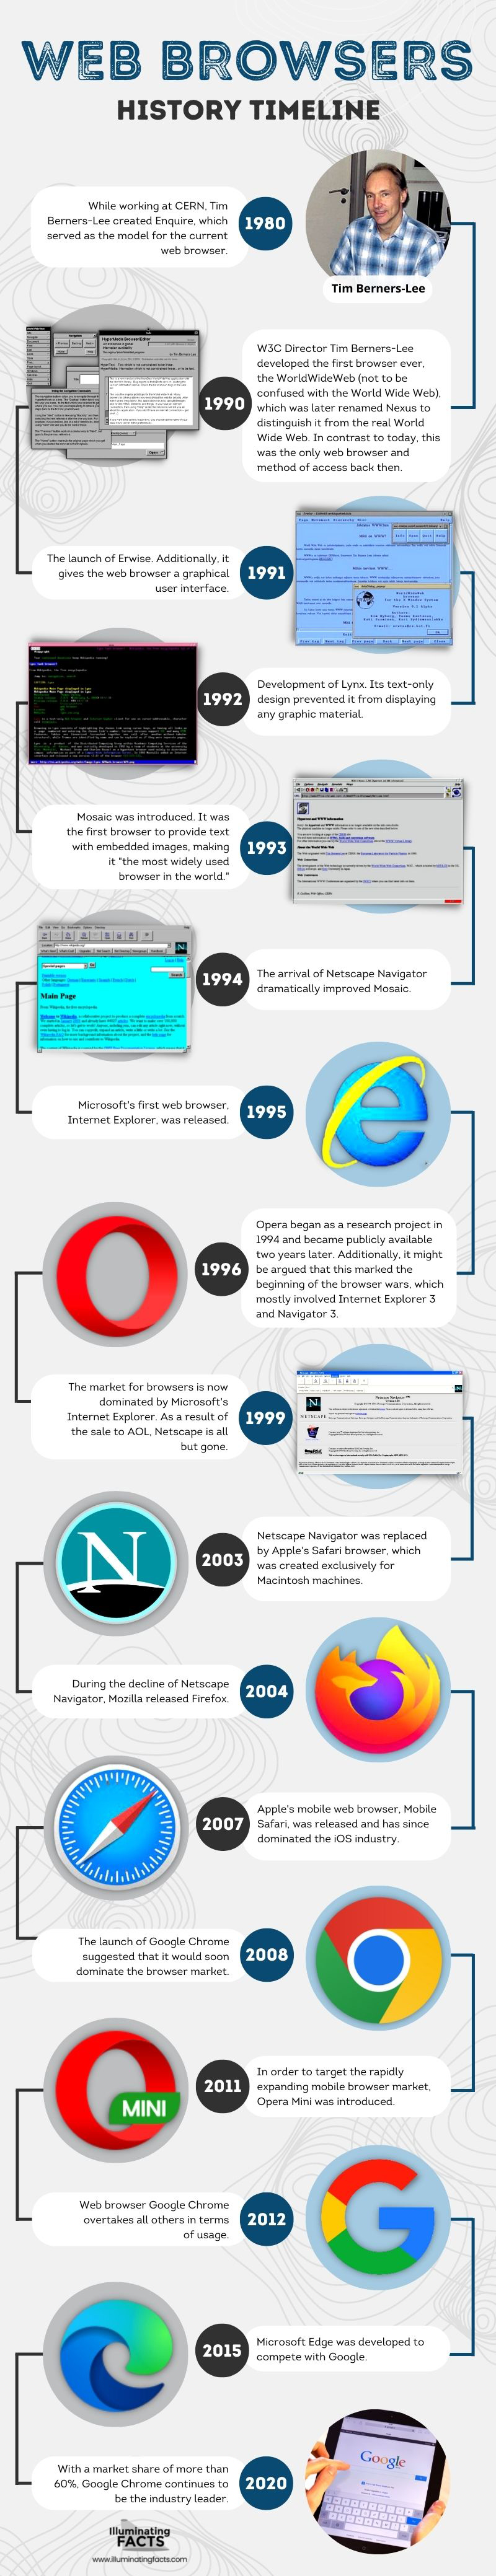 WEB BROWSERS HISTORY TIMELINE